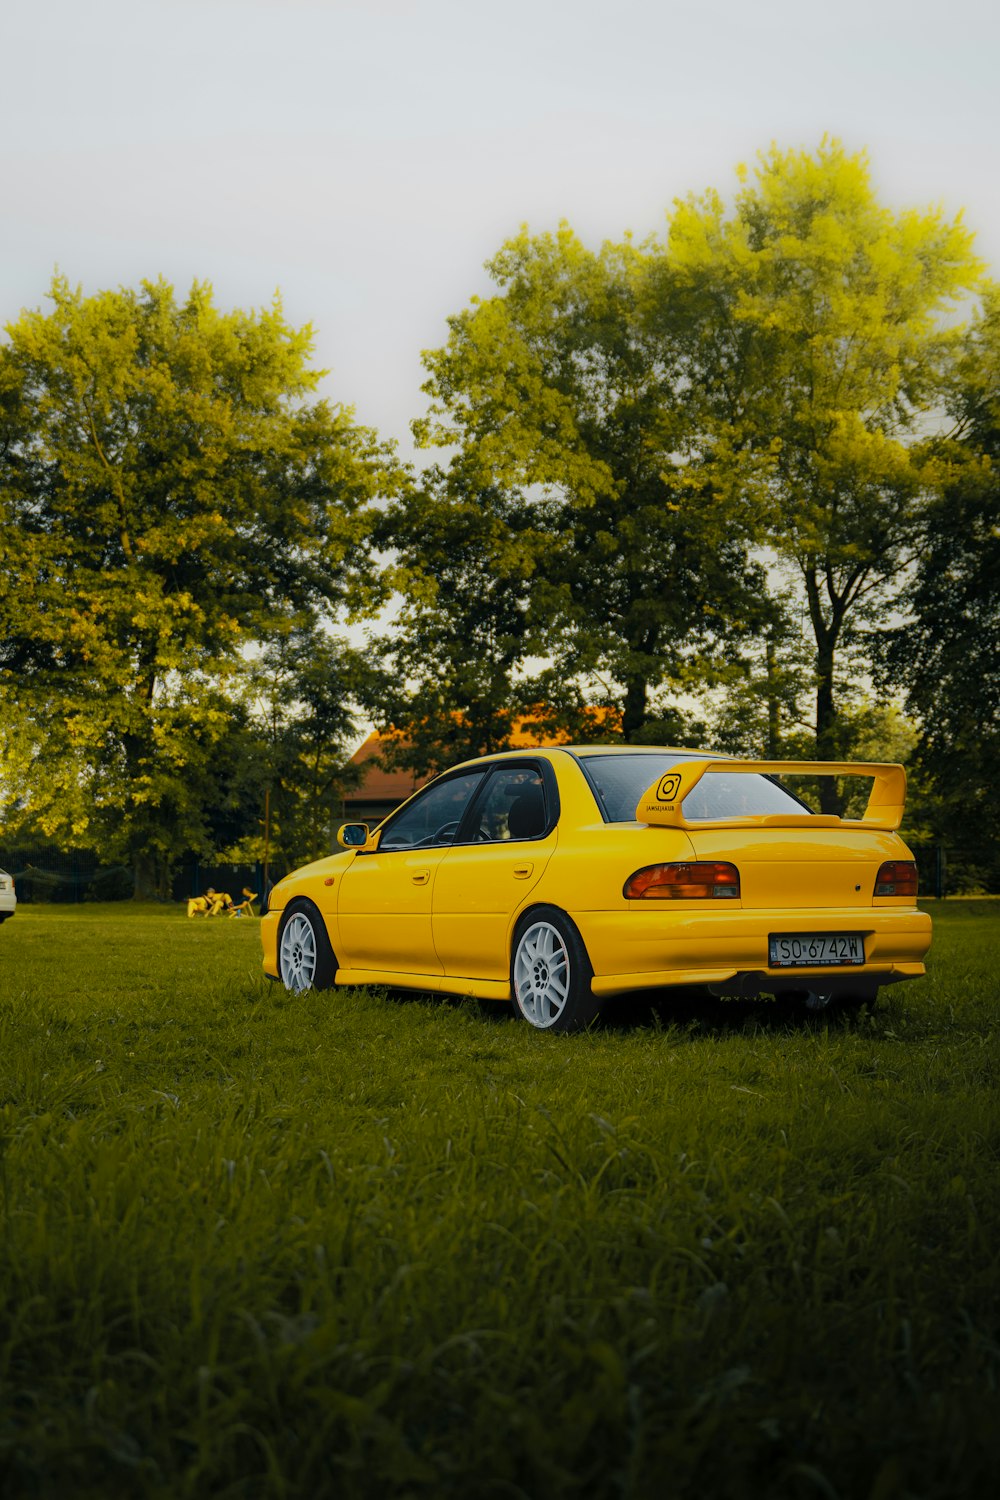 a yellow car parked in a grassy field